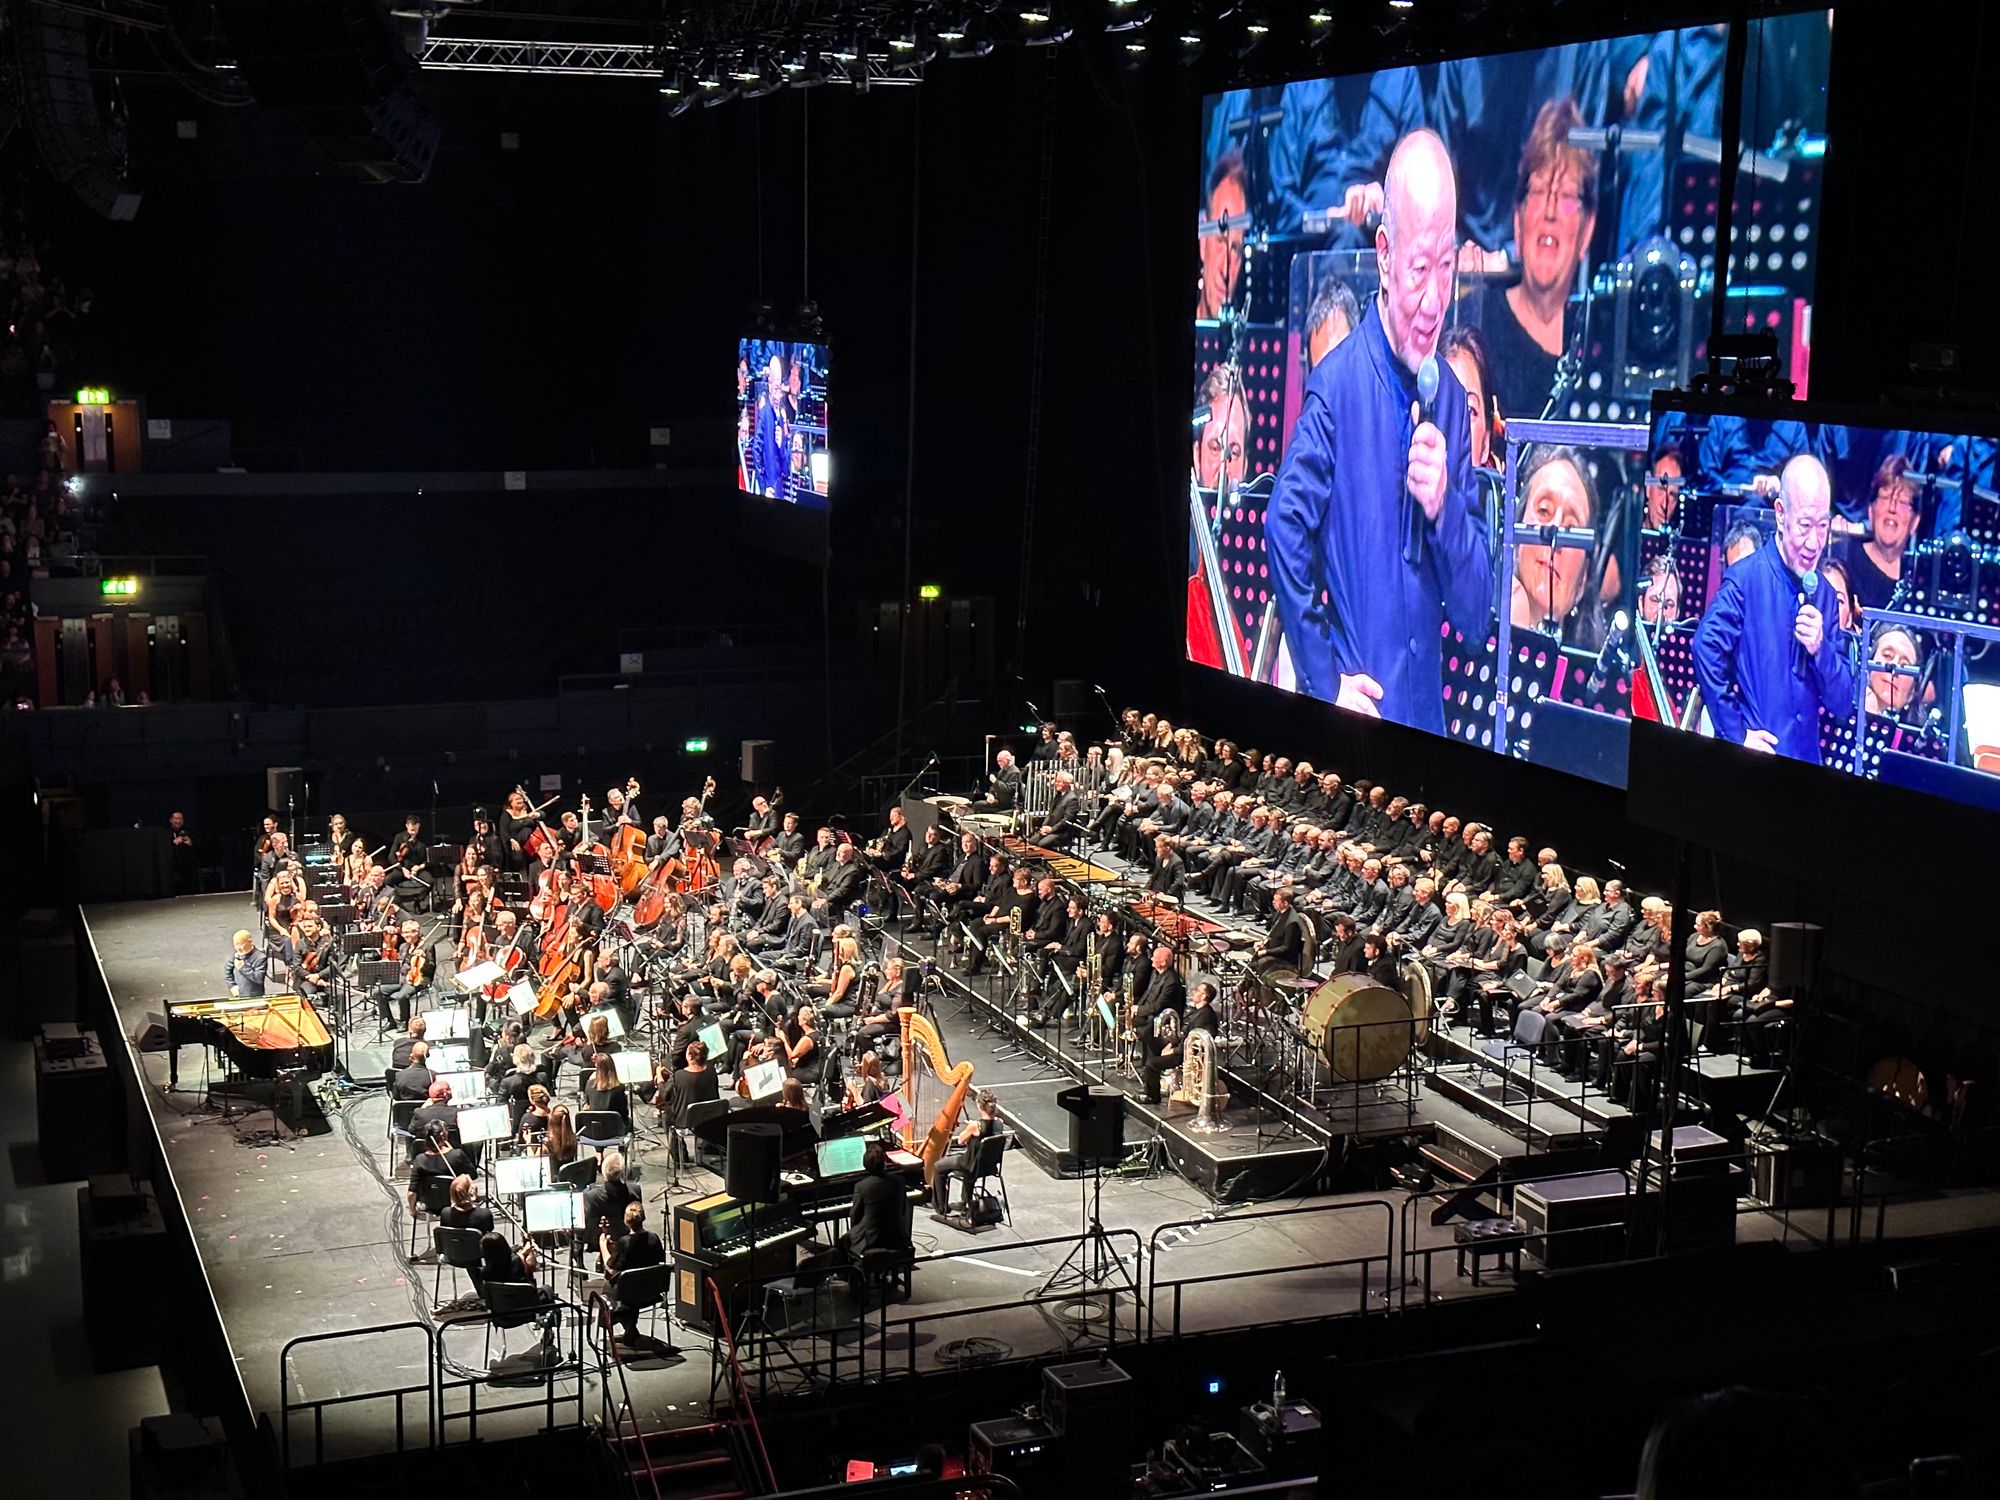 Joe Hisaishi addressing the audience with a mic in front of the symphonic orchestra, his image being live broadcast on the big screens in the background as well 